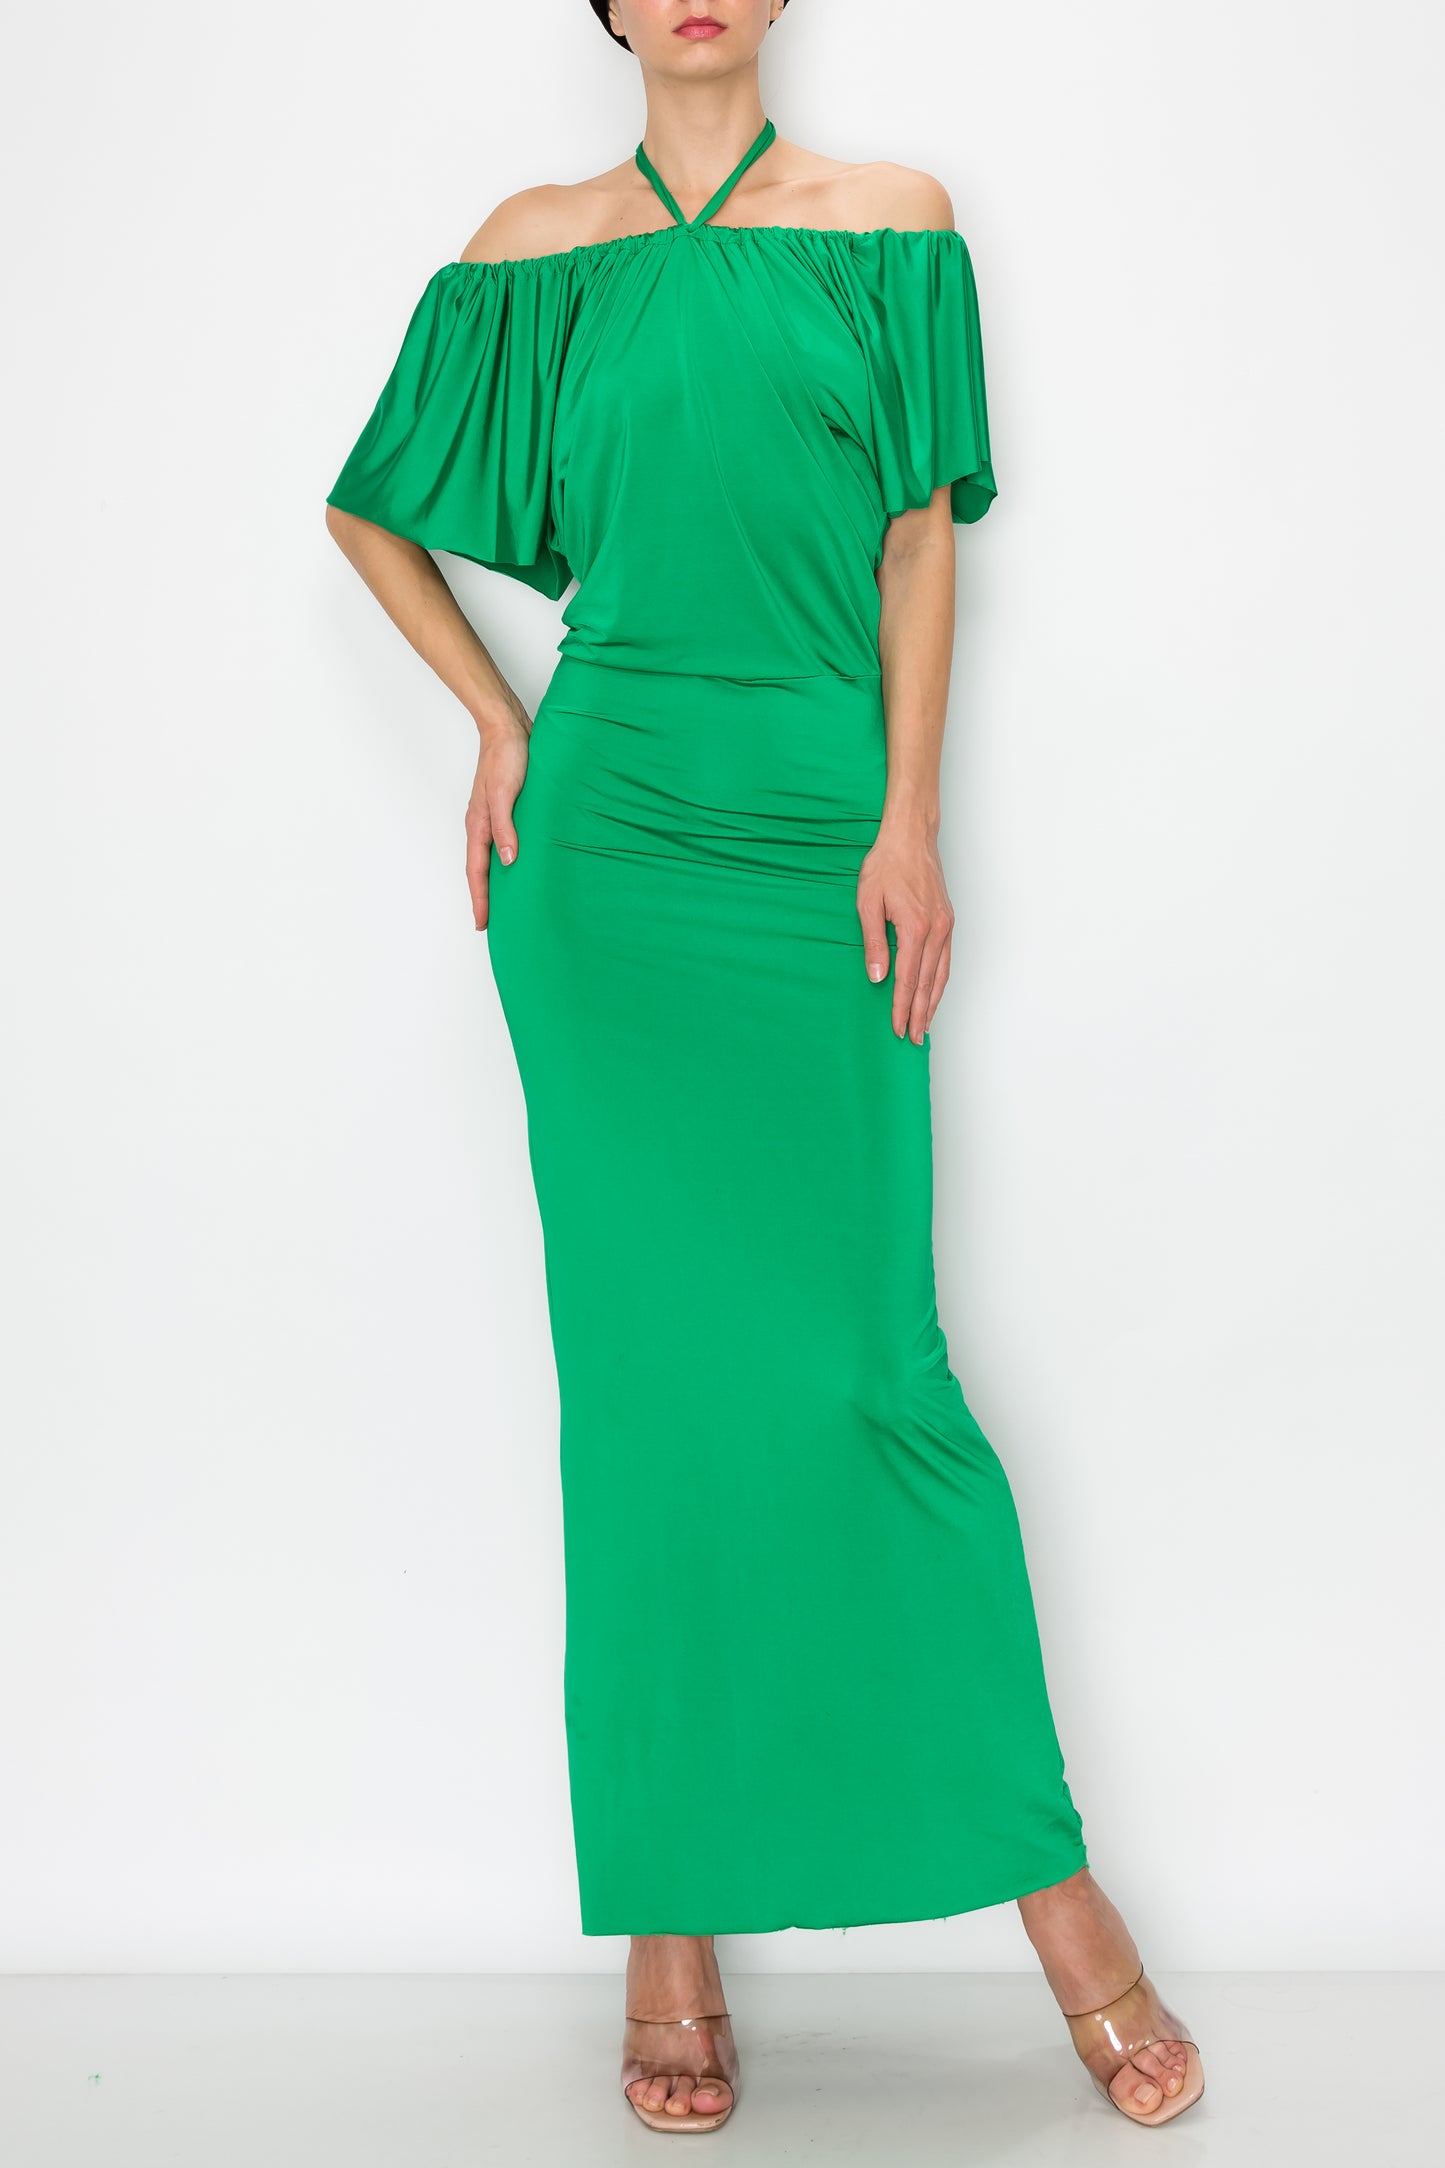 The Bloom Maxi Dress Fitted